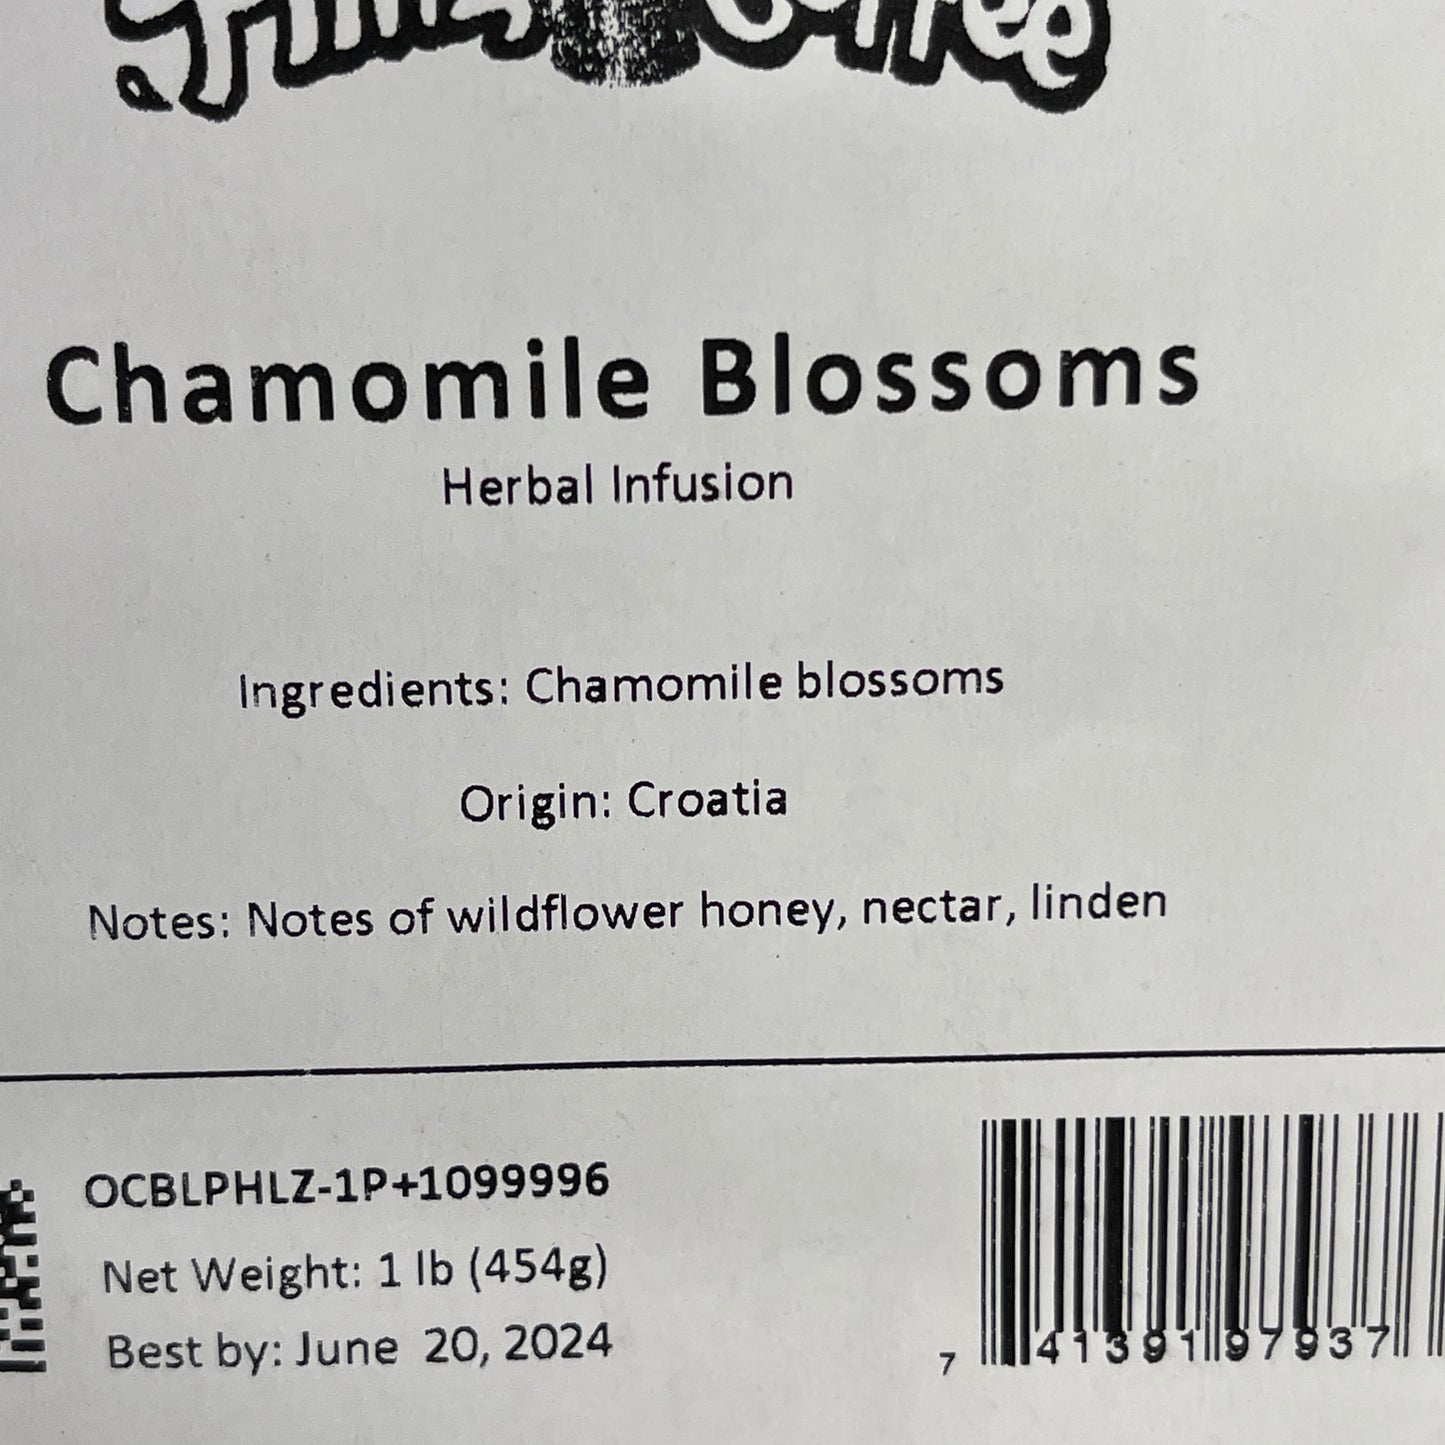 PHILZ COFFEE Chamomile Blossoms Herbal Infusion 1 Lb 6/24